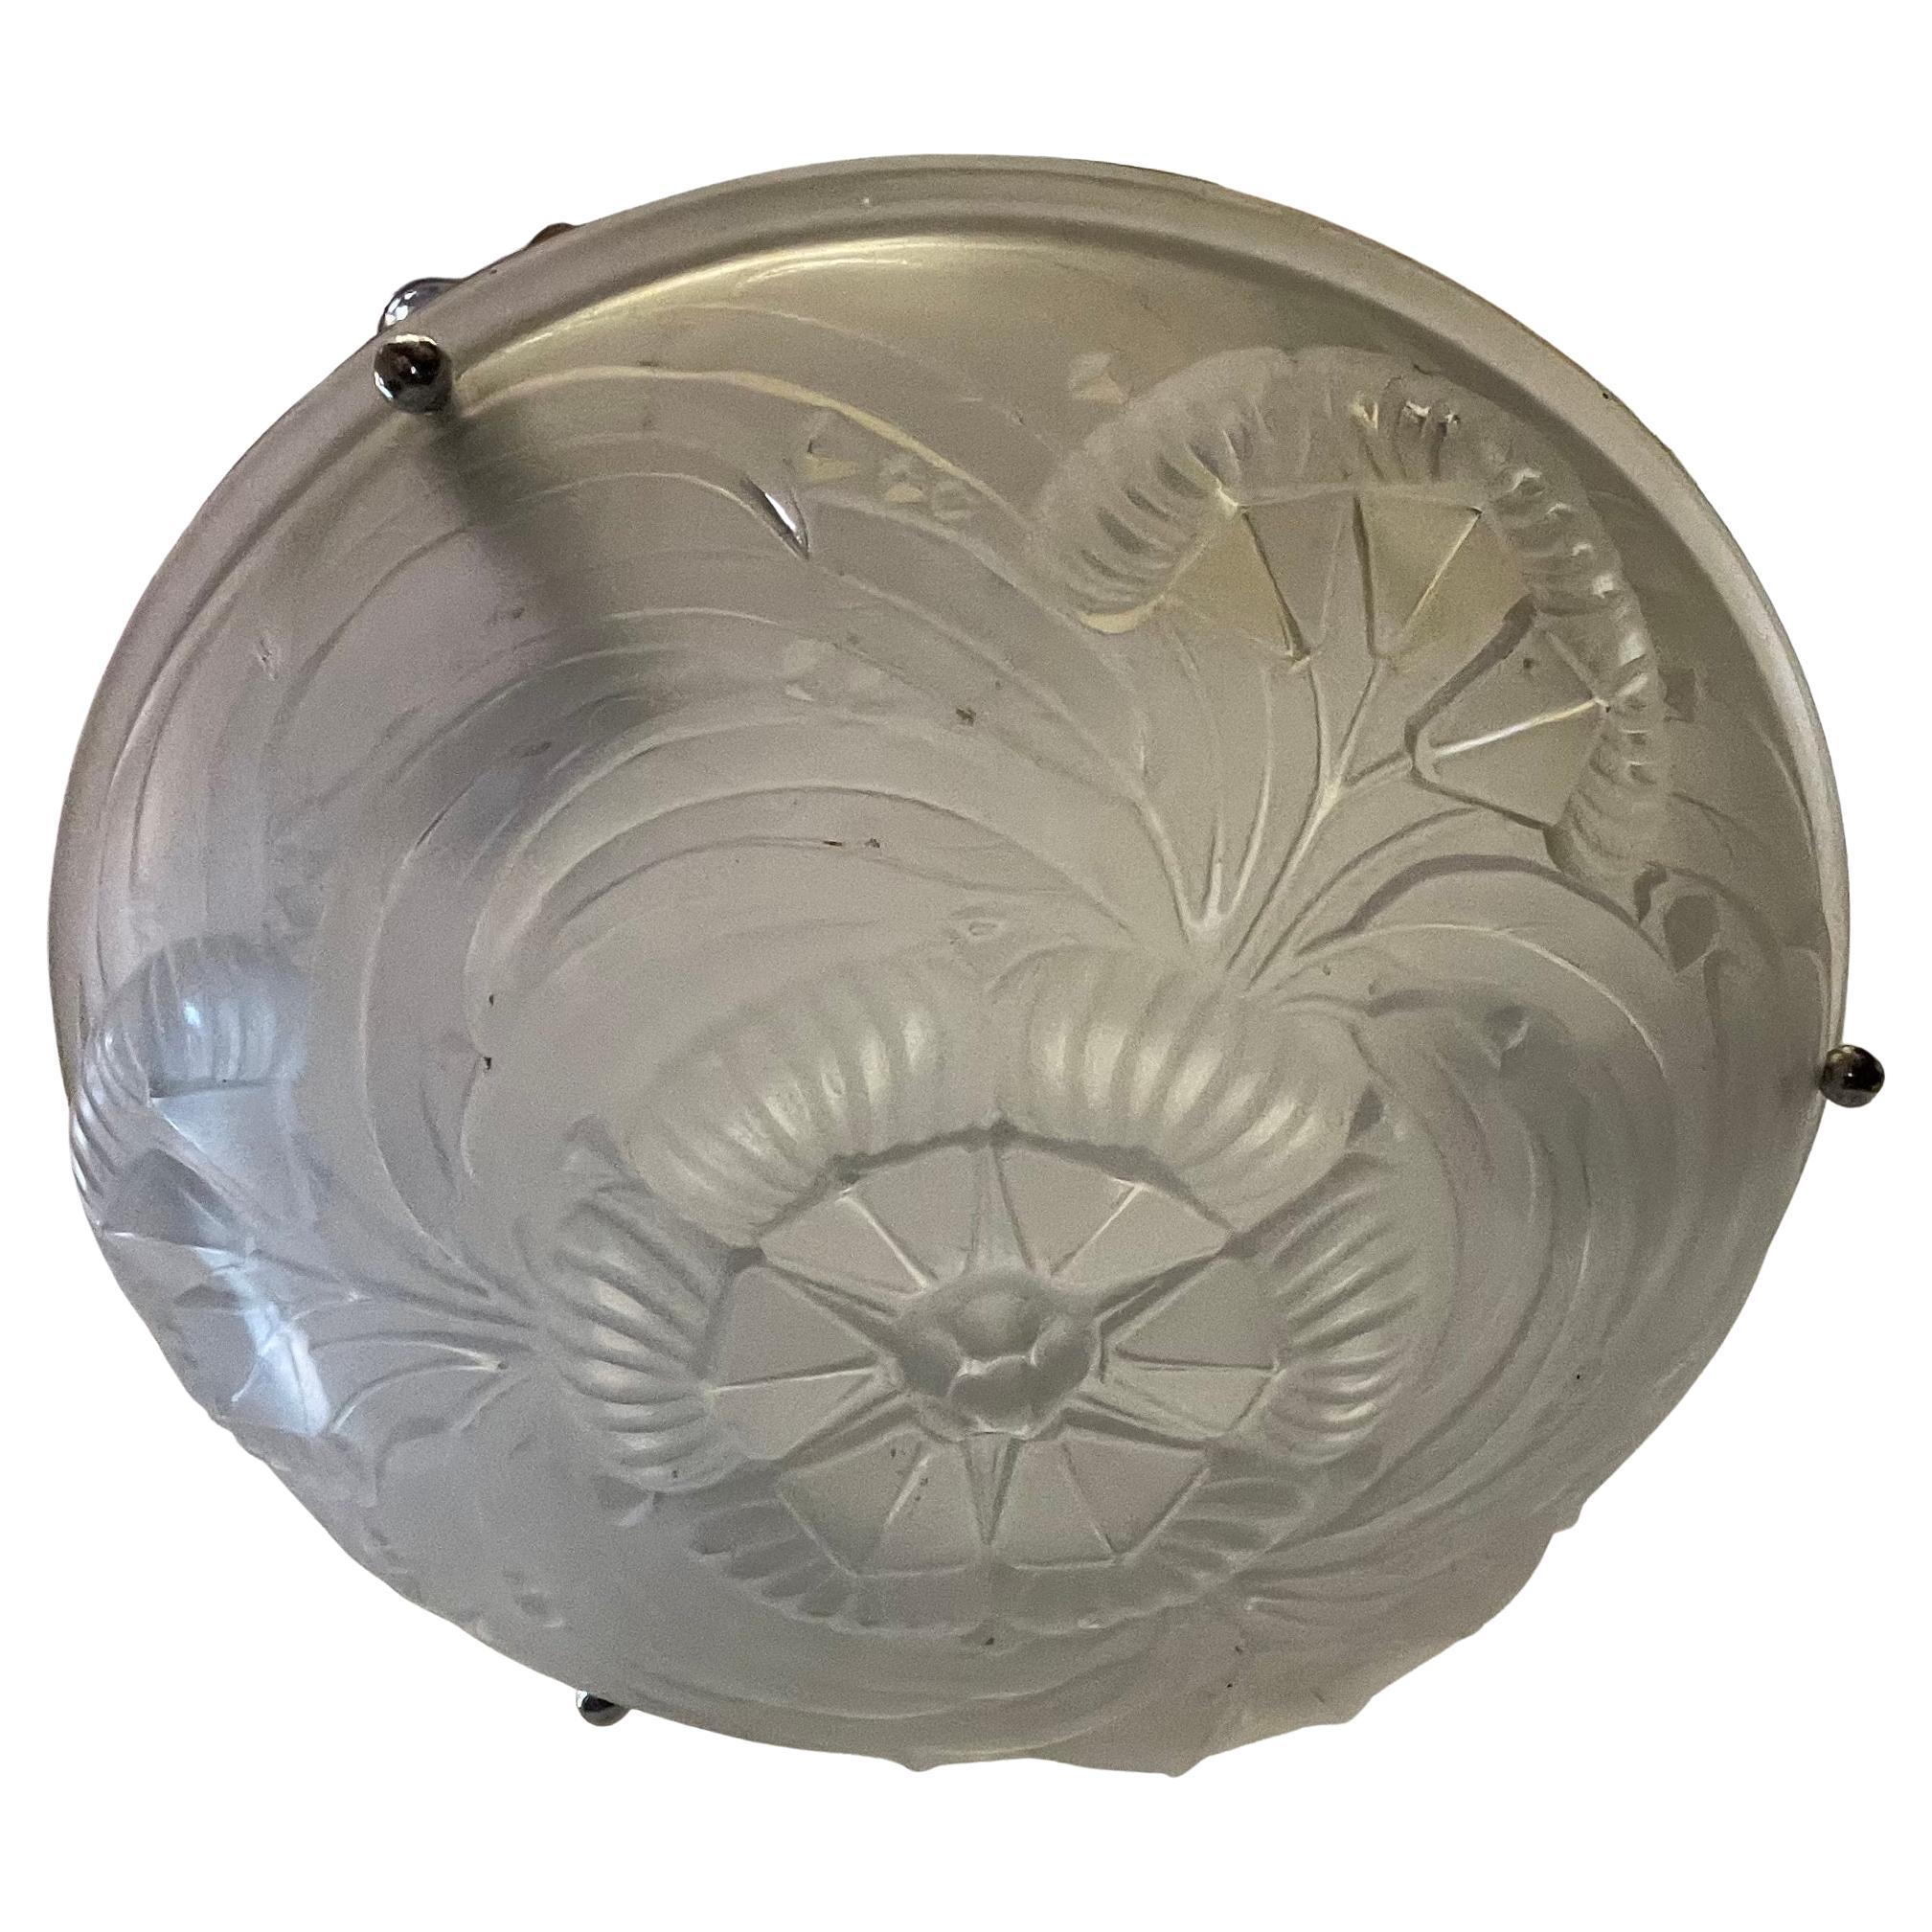 A Wonderful French Mid Century Art Deco Art Glass Bowl With Polished Nickel Fittings In The Manner Of Lalique But Stamped SEVB  - 239.
This Beautiful Light Fixture Has Been Rewired With 3 New Candelabra Sockets
The Height Is Adjustable By Adding Or